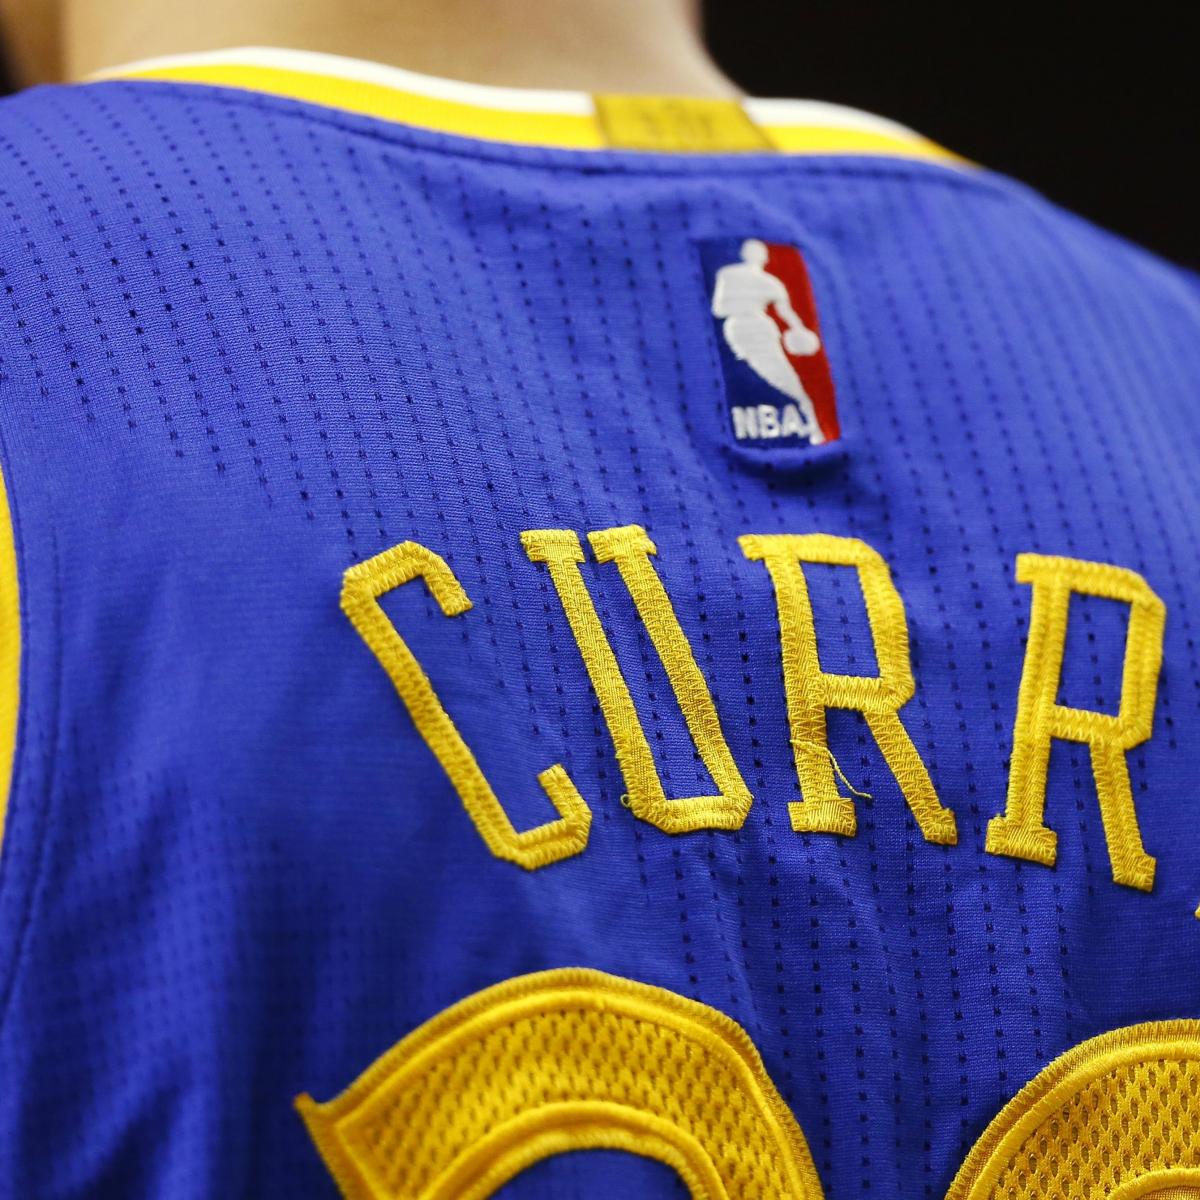 Stephen Curry Passes LeBron James in NBA Jersey Sales | Bleacher Report1200 x 1200